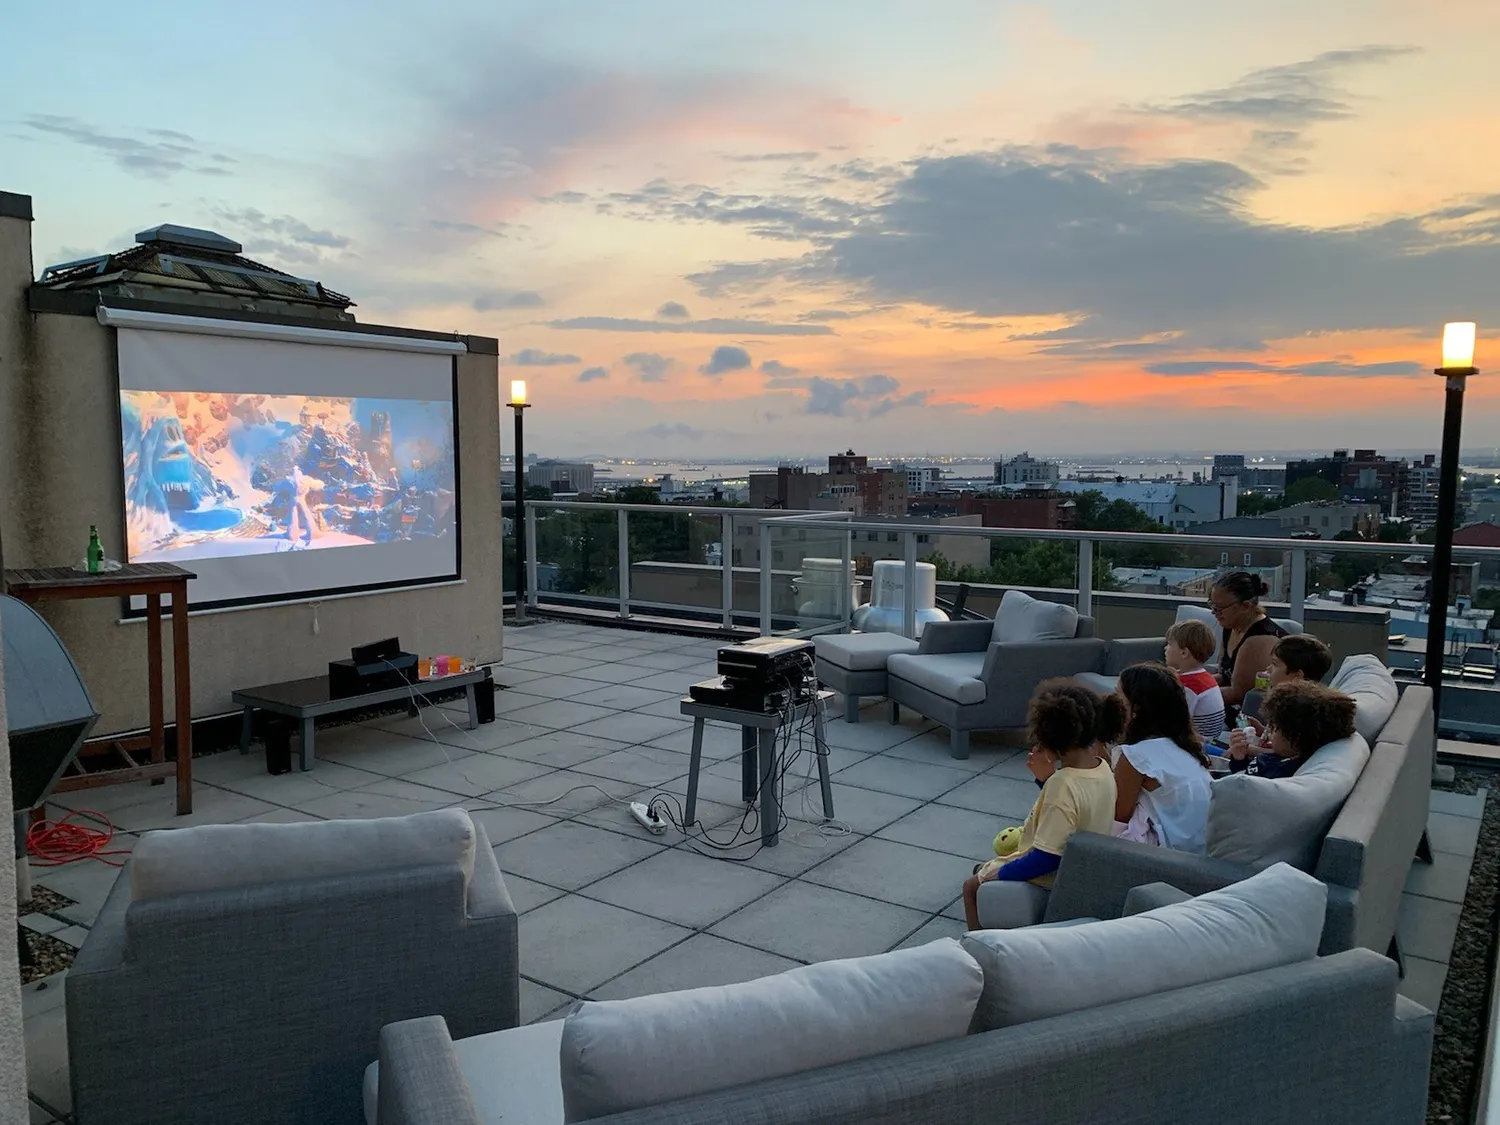 Movie Night on the Common Roof Deck!